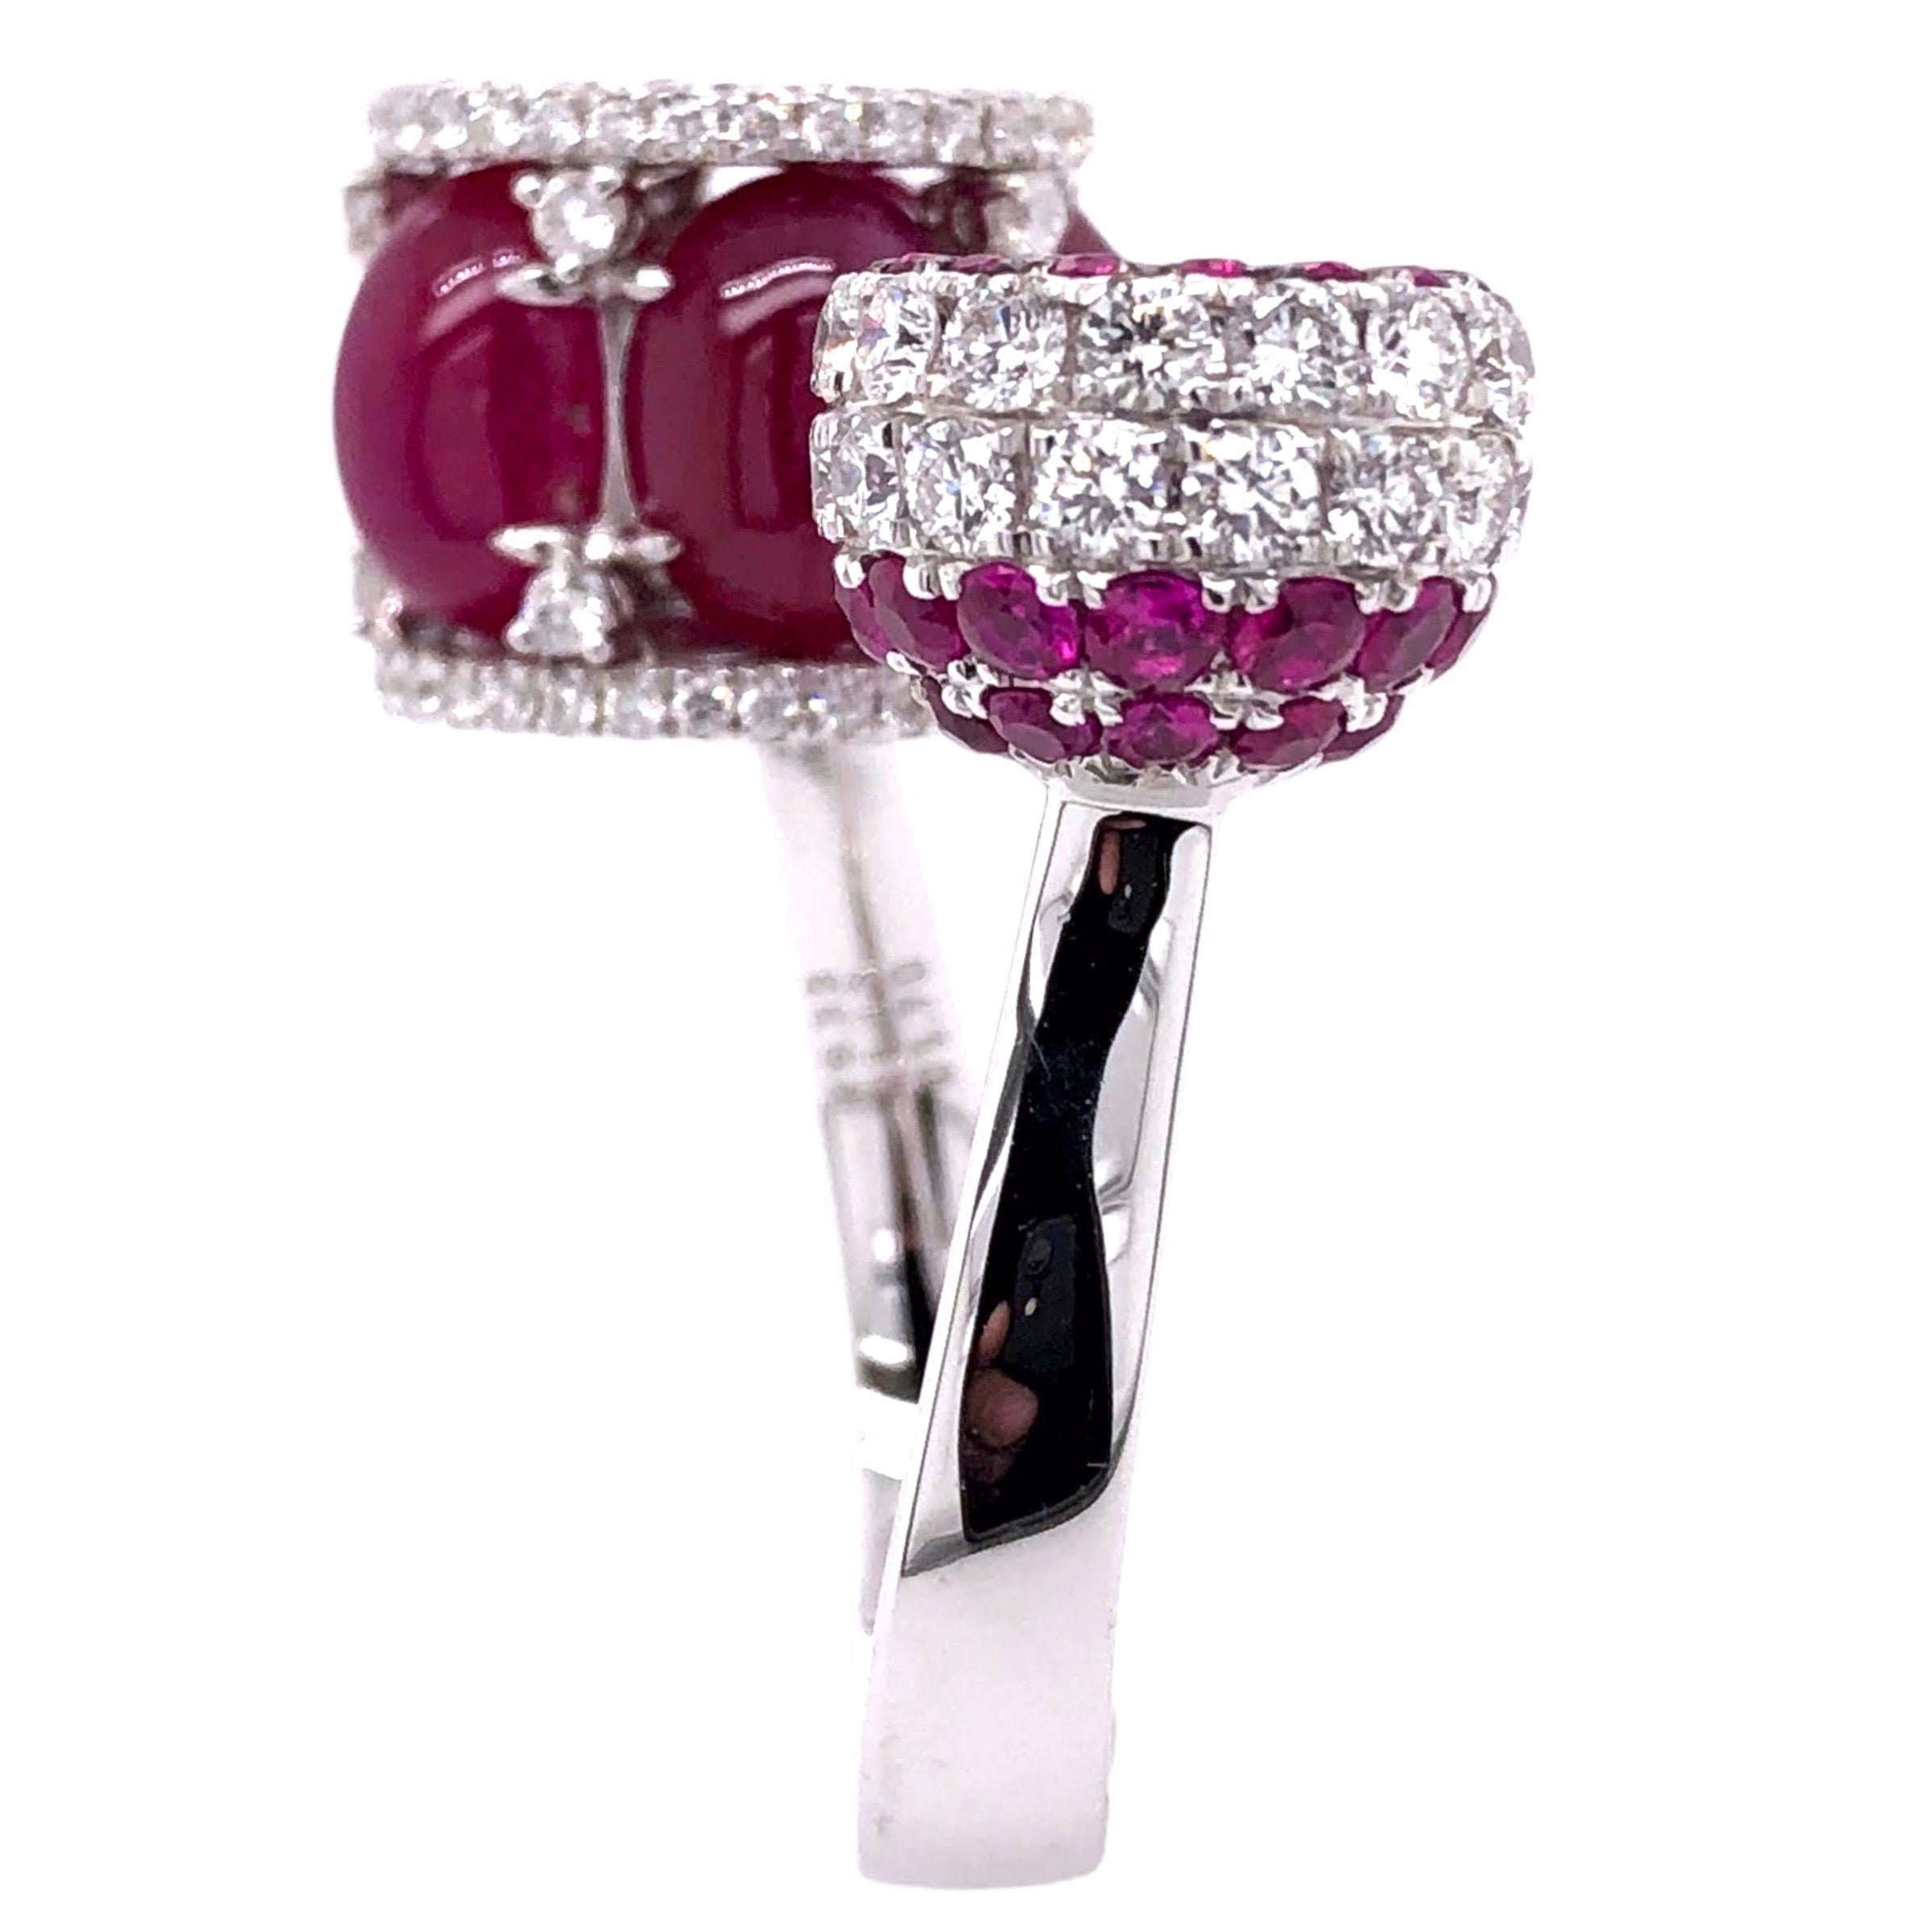 Paris Craft House 9.33 Carat Cabochon Ruby Diamond Ring in 18 Karat White Gold In New Condition For Sale In Hong Kong, HK